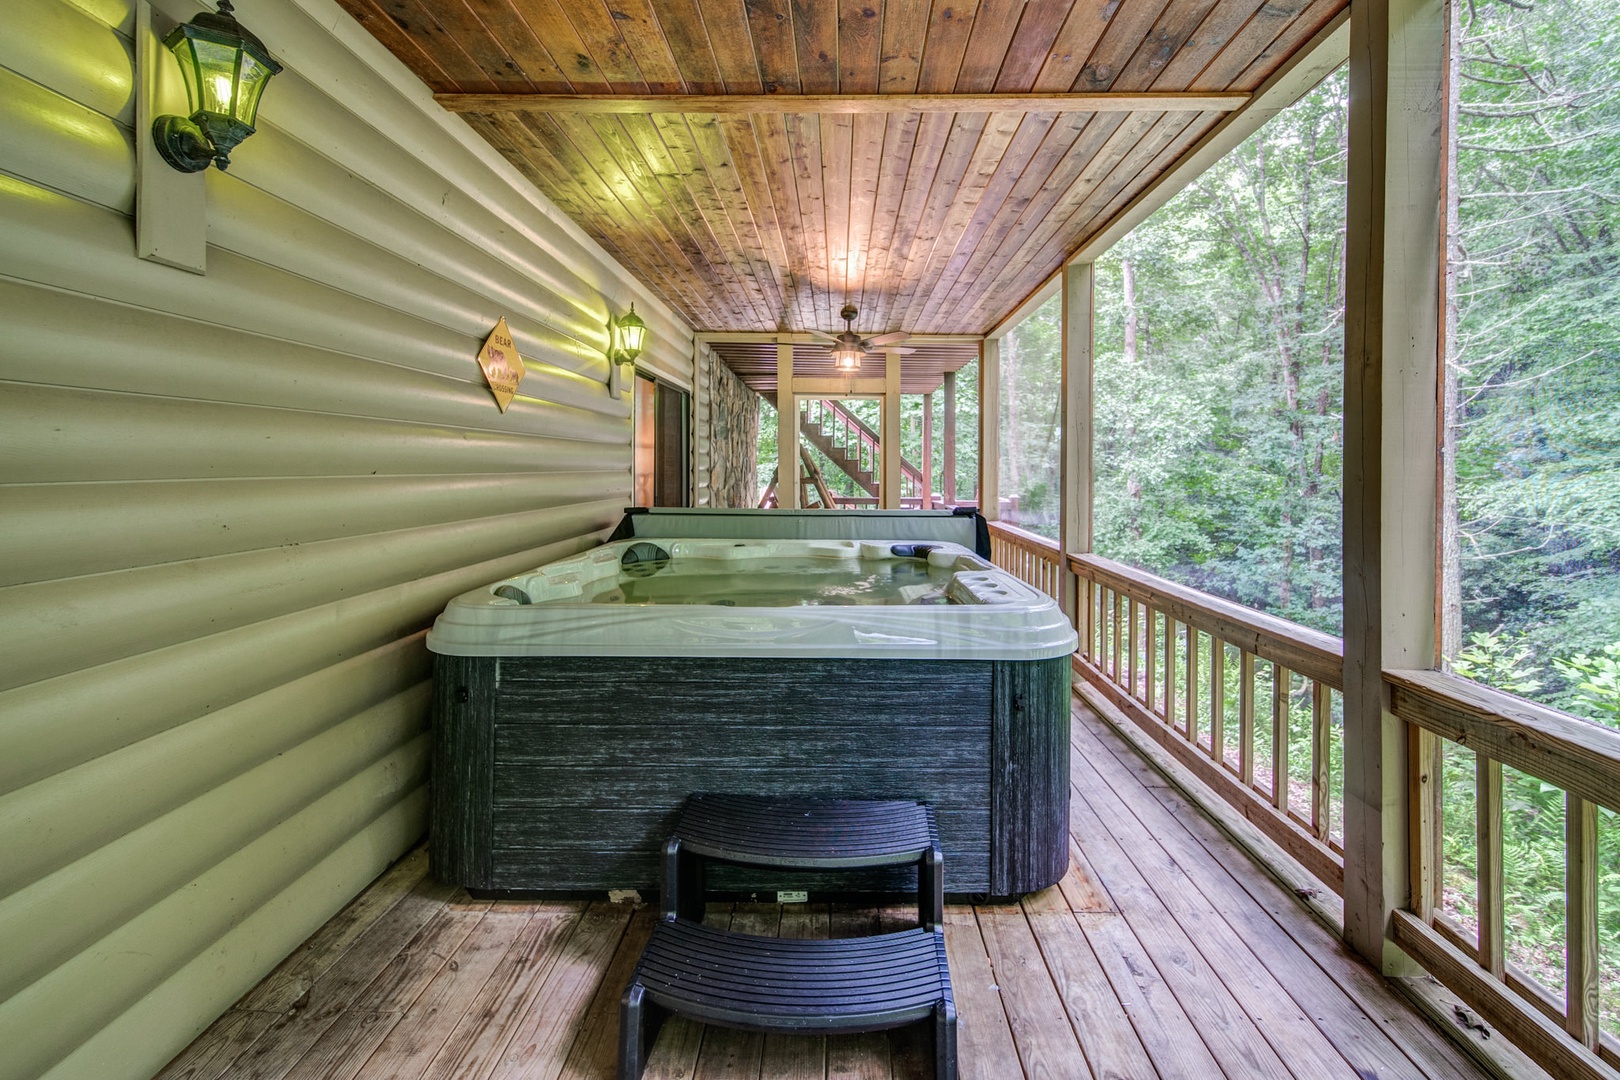 Soak away the stress with views of the running creek and private waterfall next to the woods